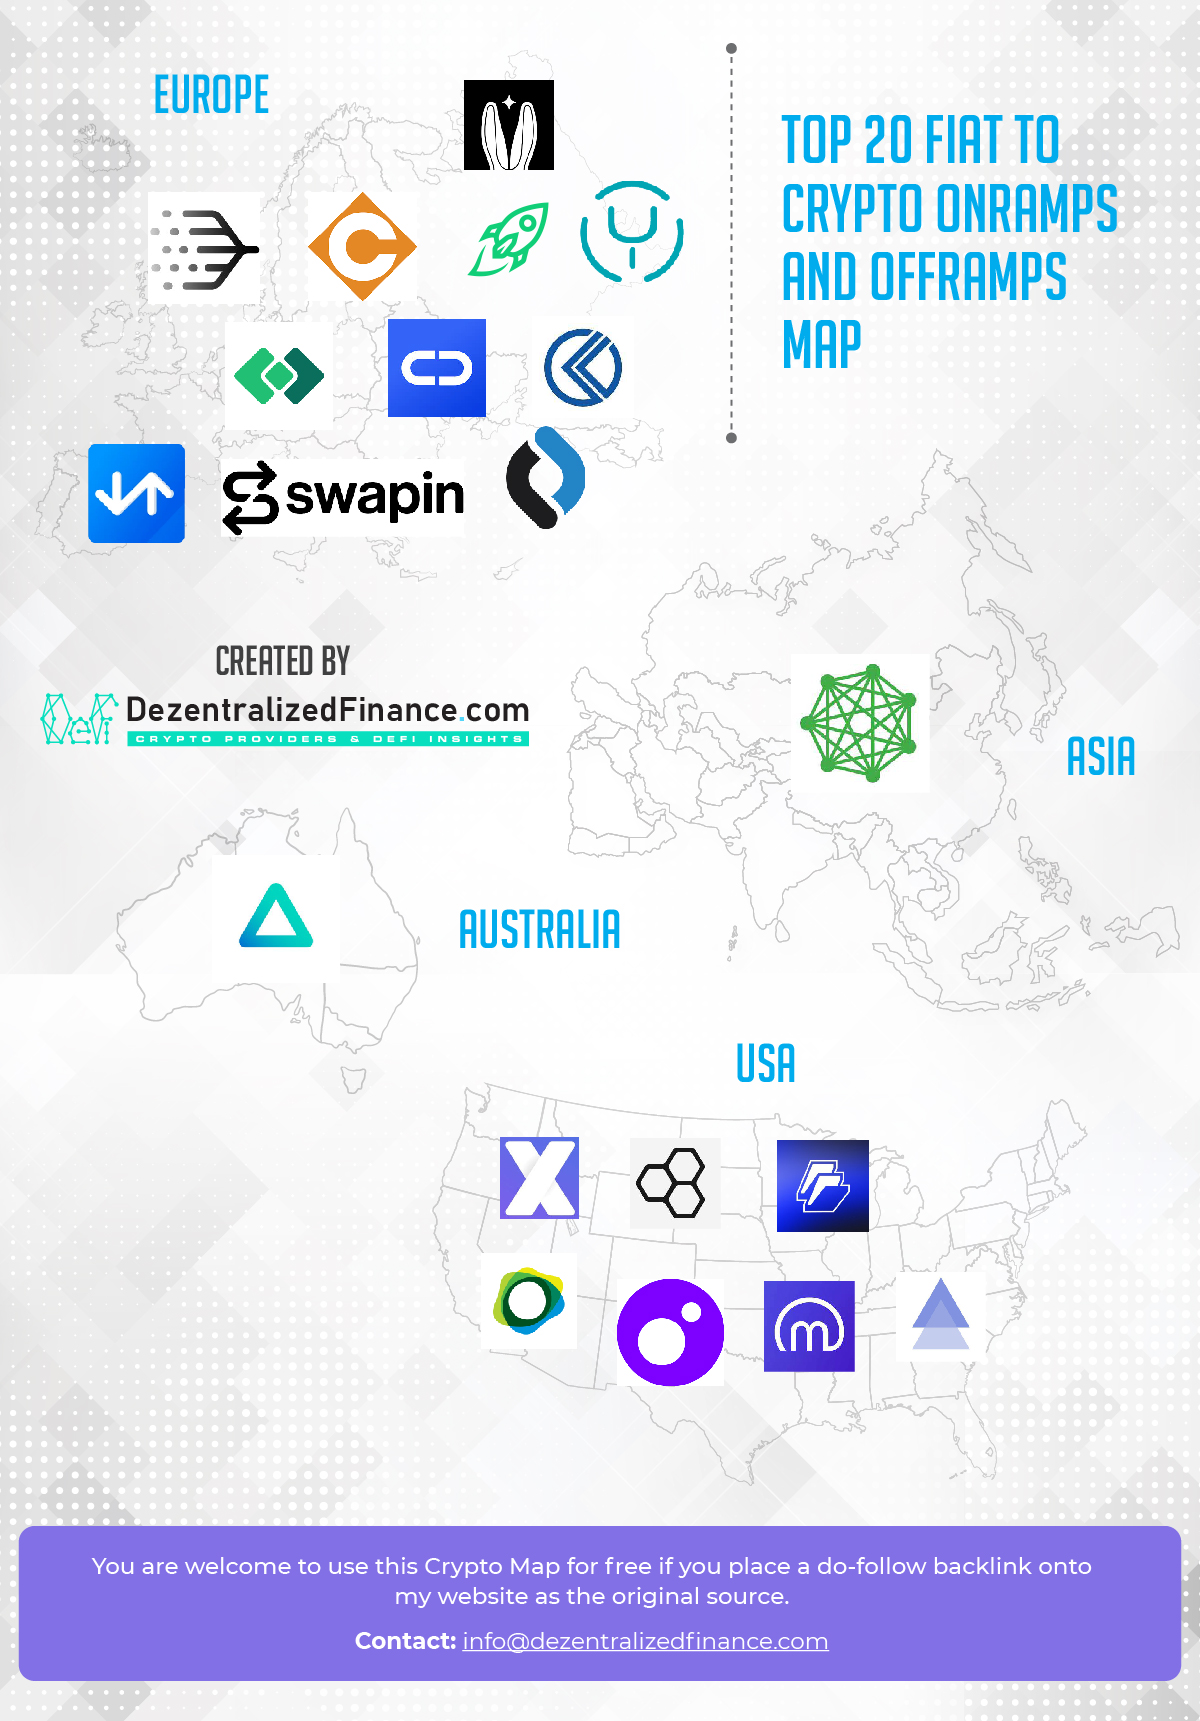 Top 20 Fiat to Crypto Onramps and Offramps Map